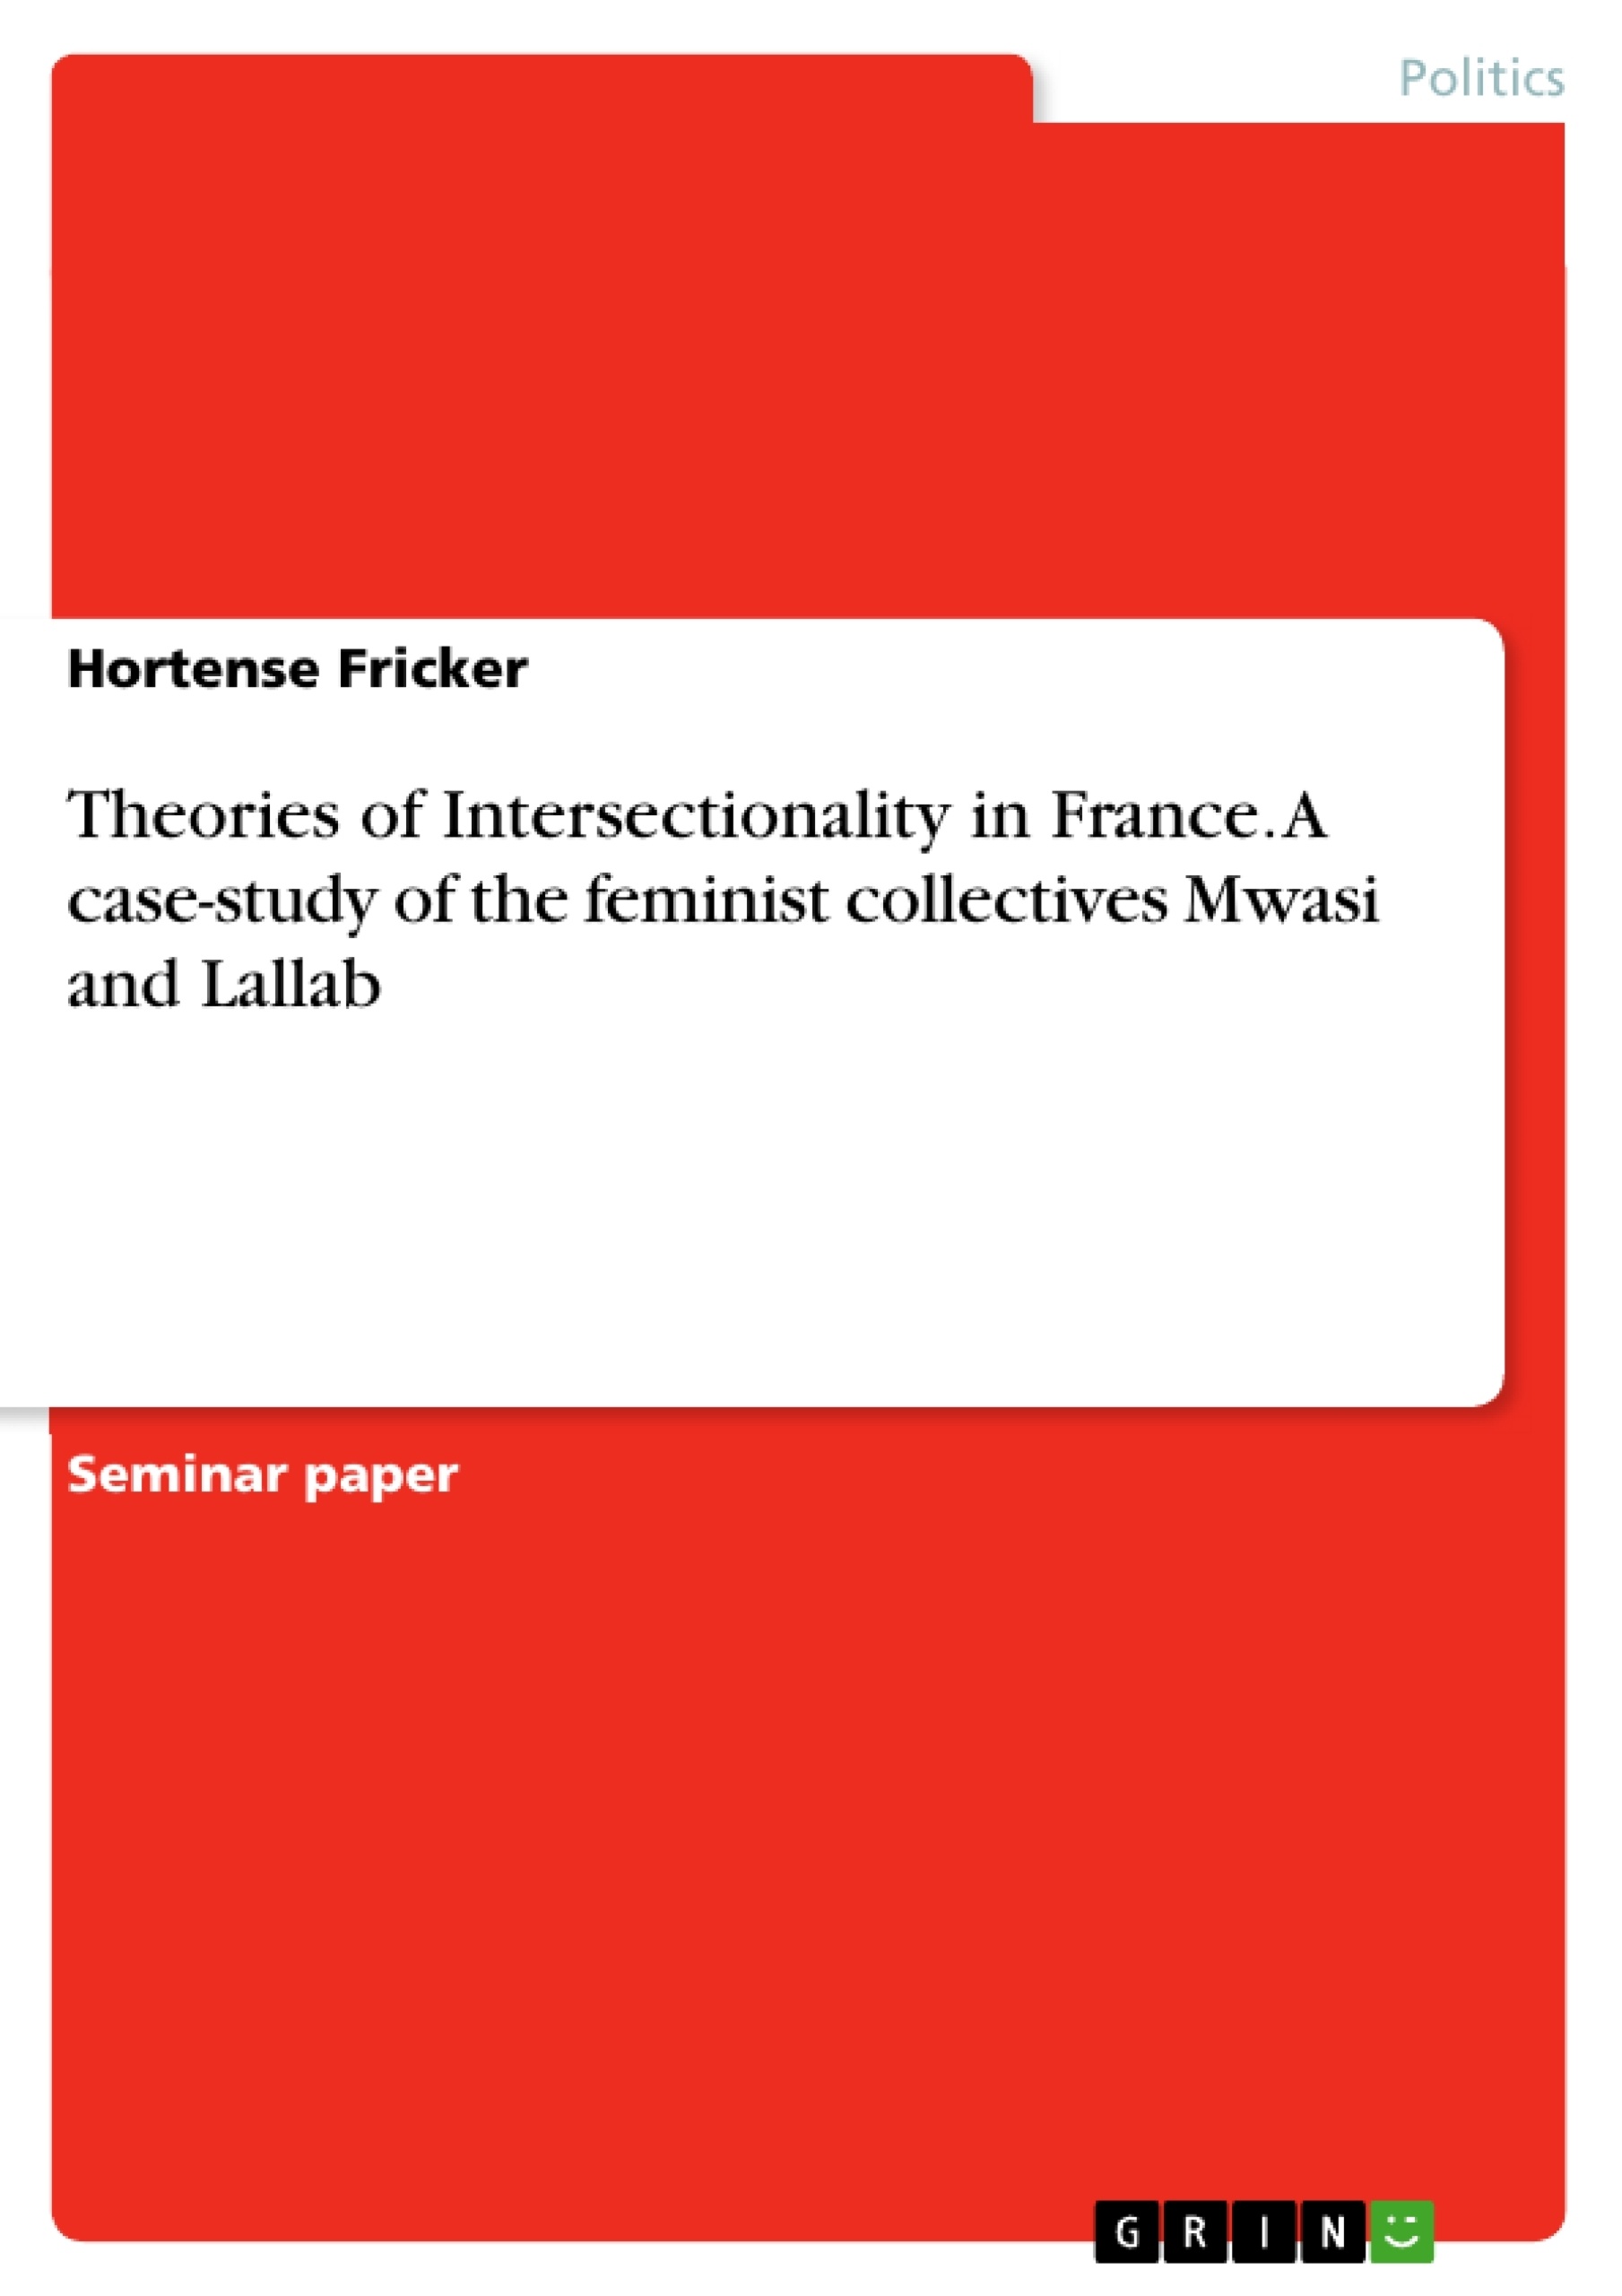 Title: Theories of Intersectionality in France. A case-study of the feminist collectives Mwasi and Lallab